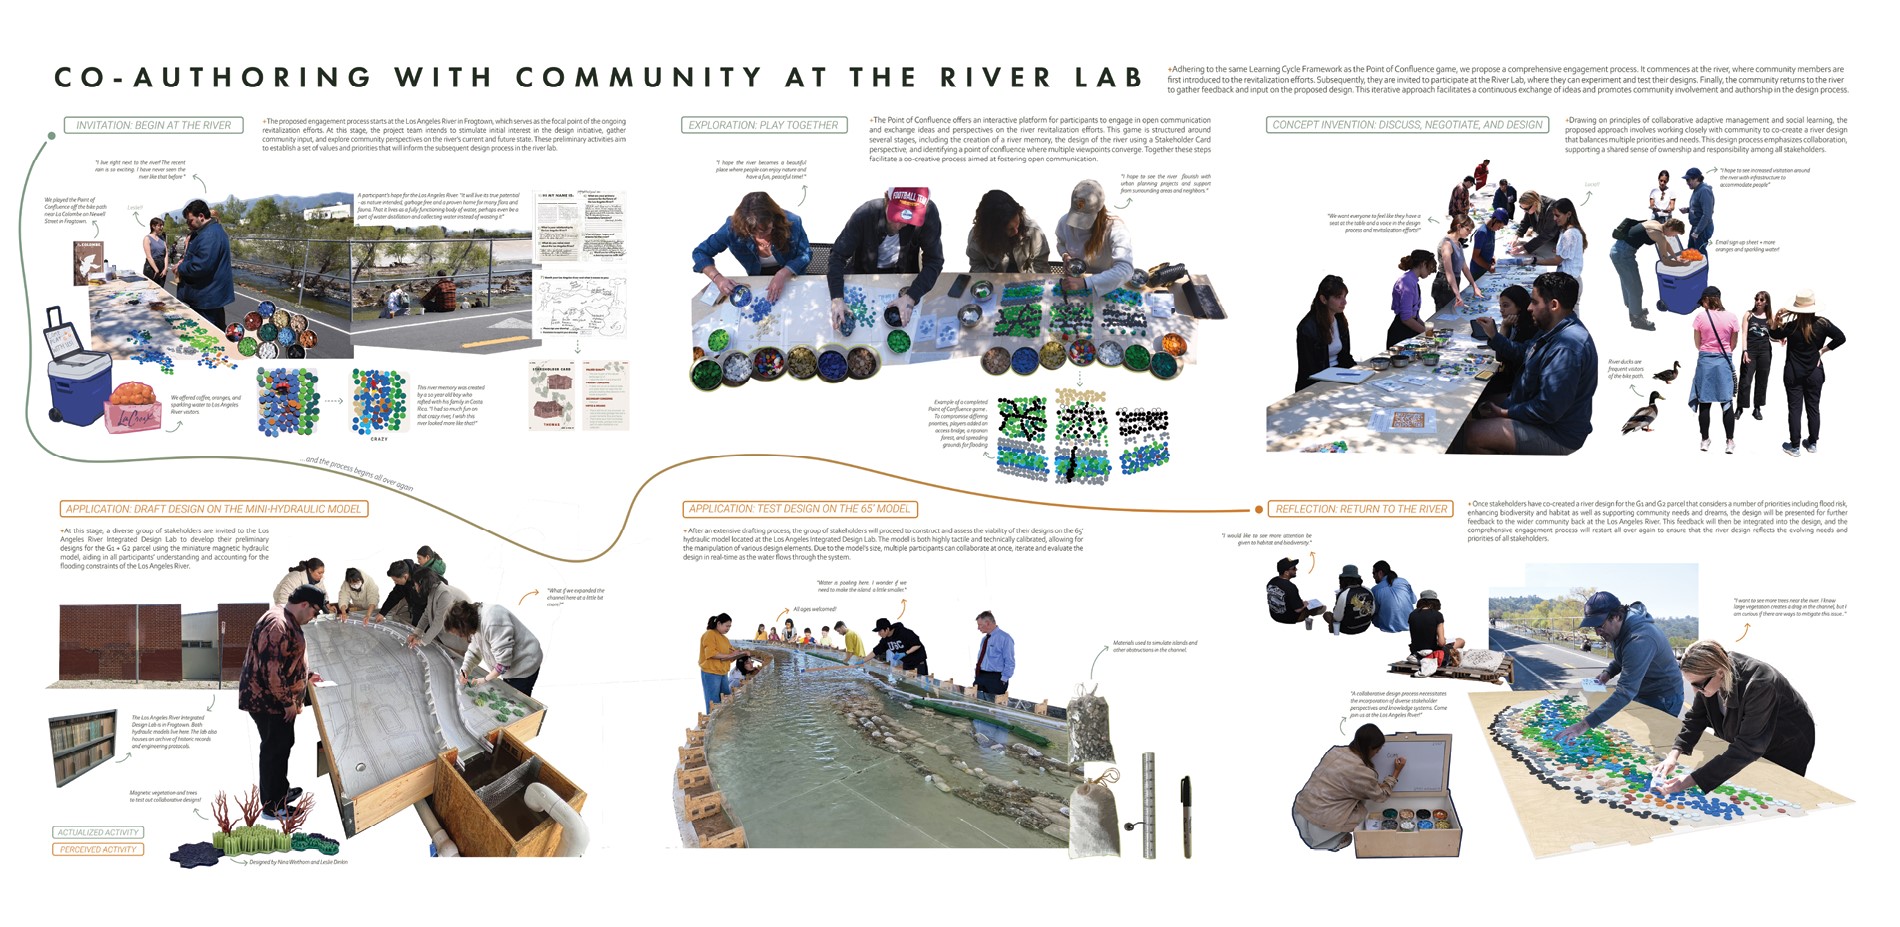 Co-Authoring with Community: Envisioning Point of Confluence as Part of a Larger Comprehensive Engagement at the LA River Integrated Design Lab